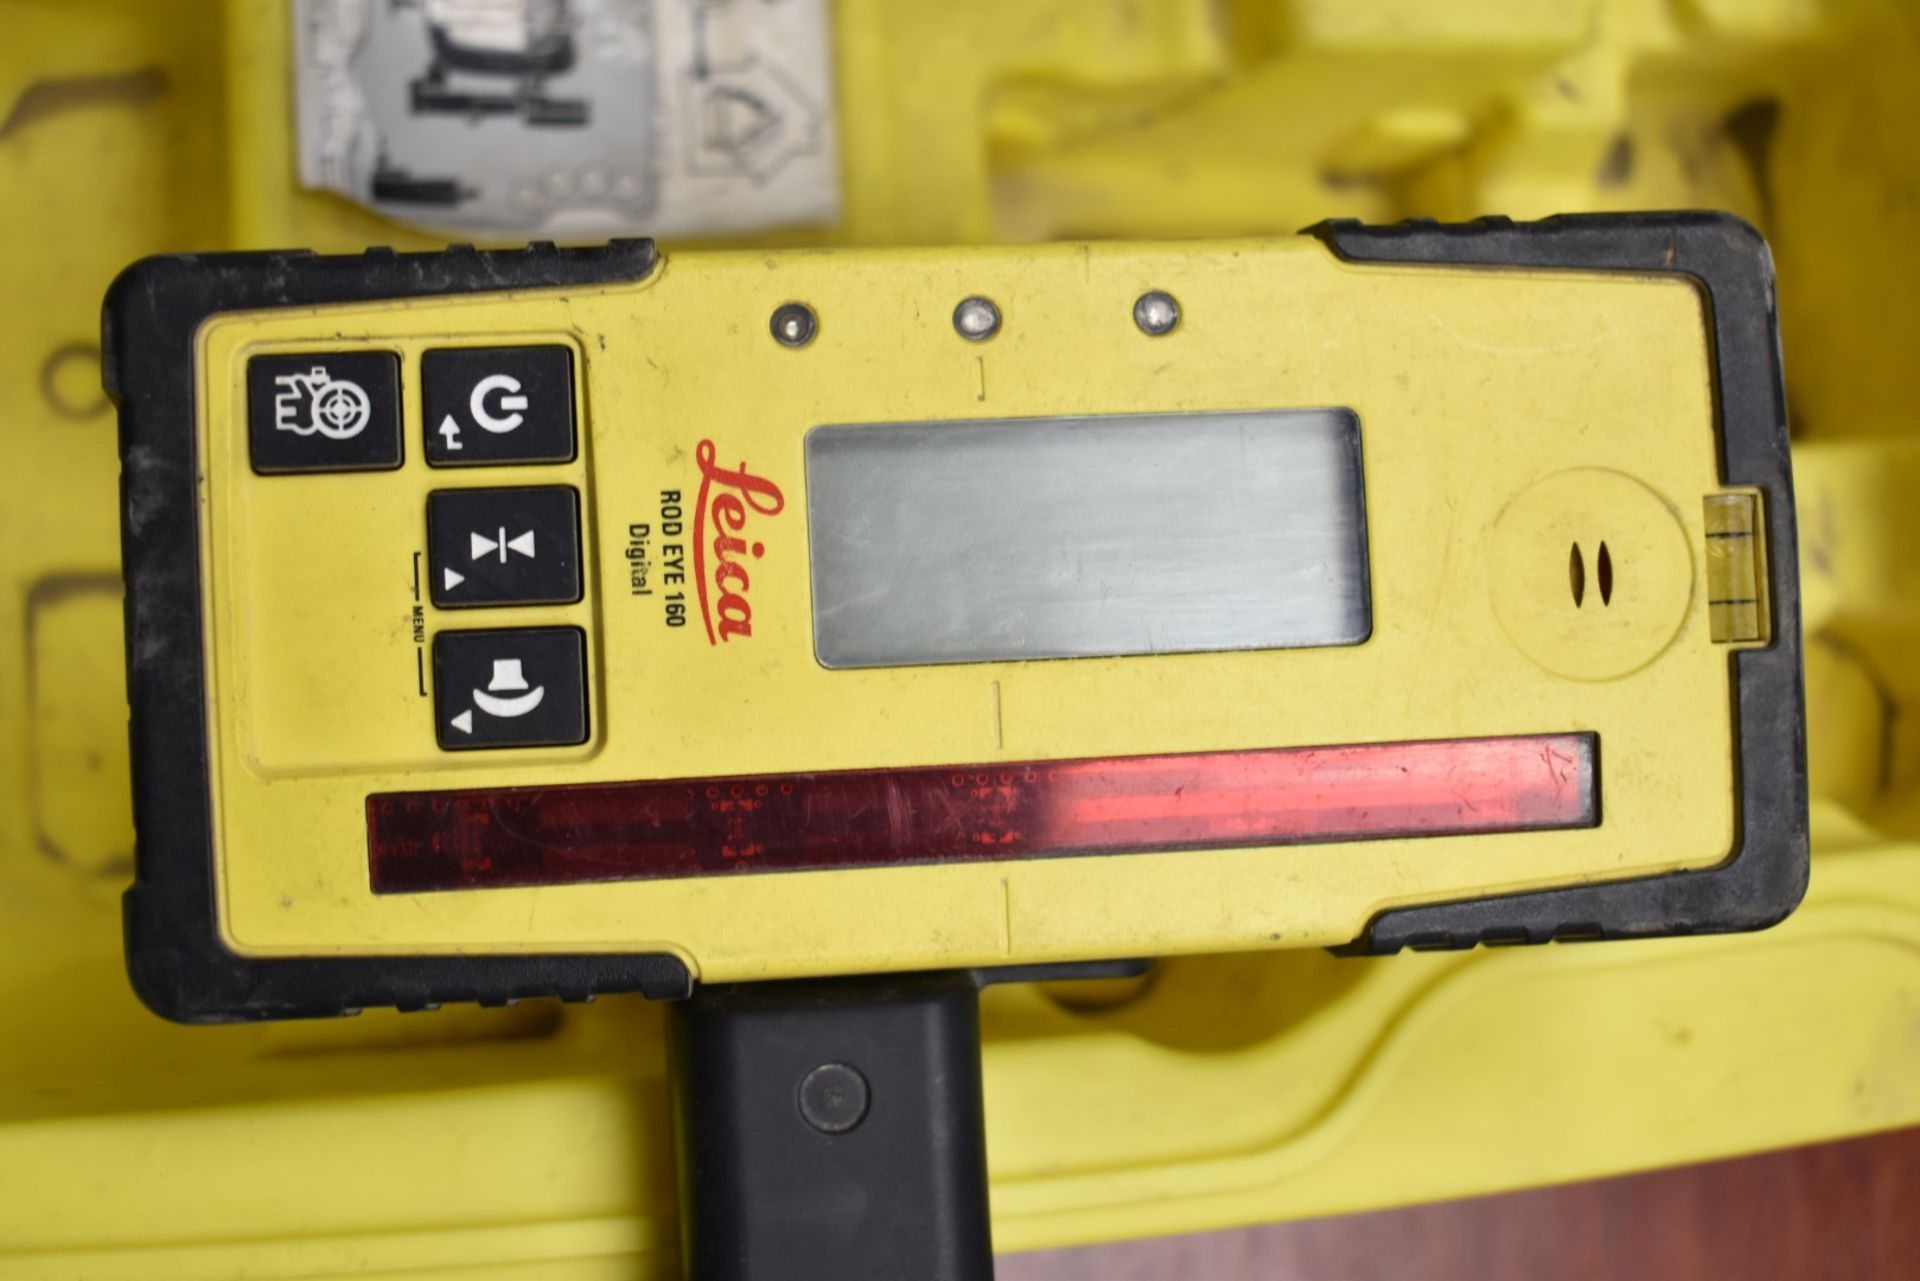 LEICA RUGBY 610 SELF-LEVELING ROTATING LASER LEVEL WITH ROD EYE LASER RECEIVER, S/N: 13646108495 - Image 4 of 5